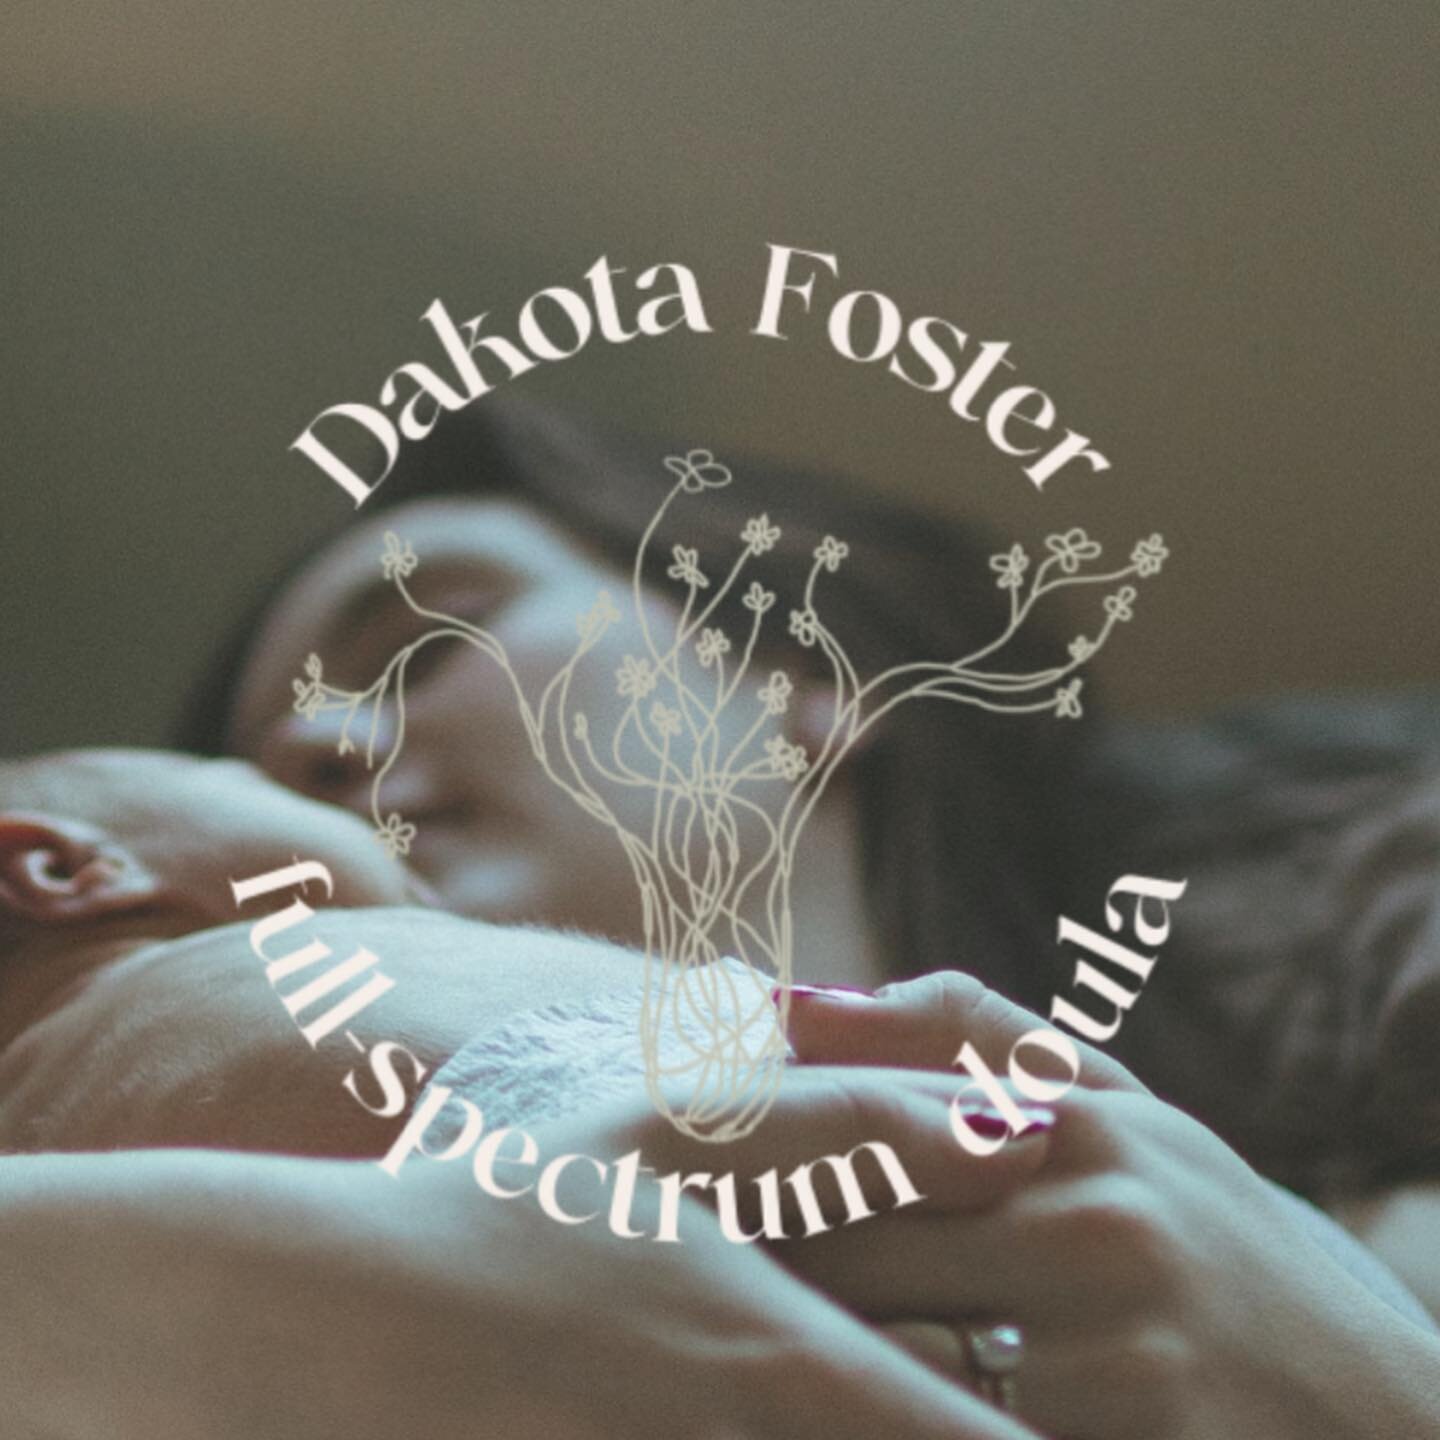 dakotafosterdoula.com 

Here we are. I have found the work that my soul loves and I have given myself the time to enter into it fully prepared. I&rsquo;ve poured so much love into a space to connect with and support beautiful people as they enter par